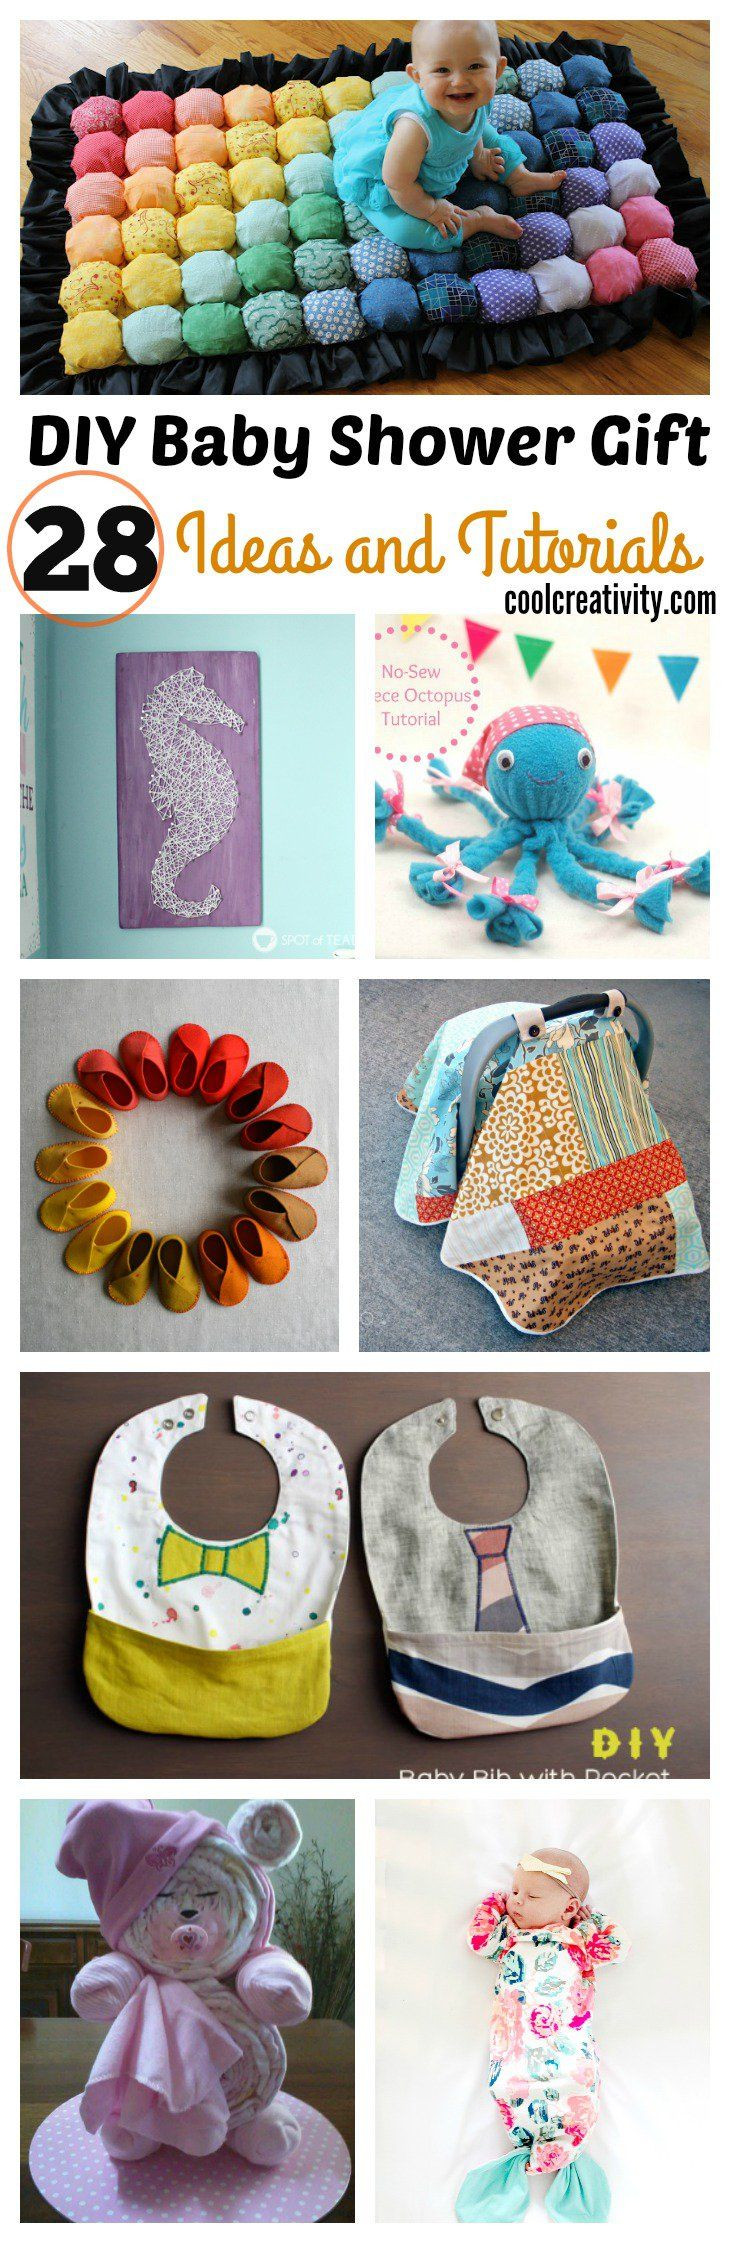 Diy Baby Shower Gift Ideas
 17 Best images about Cool Creativity on Pinterest